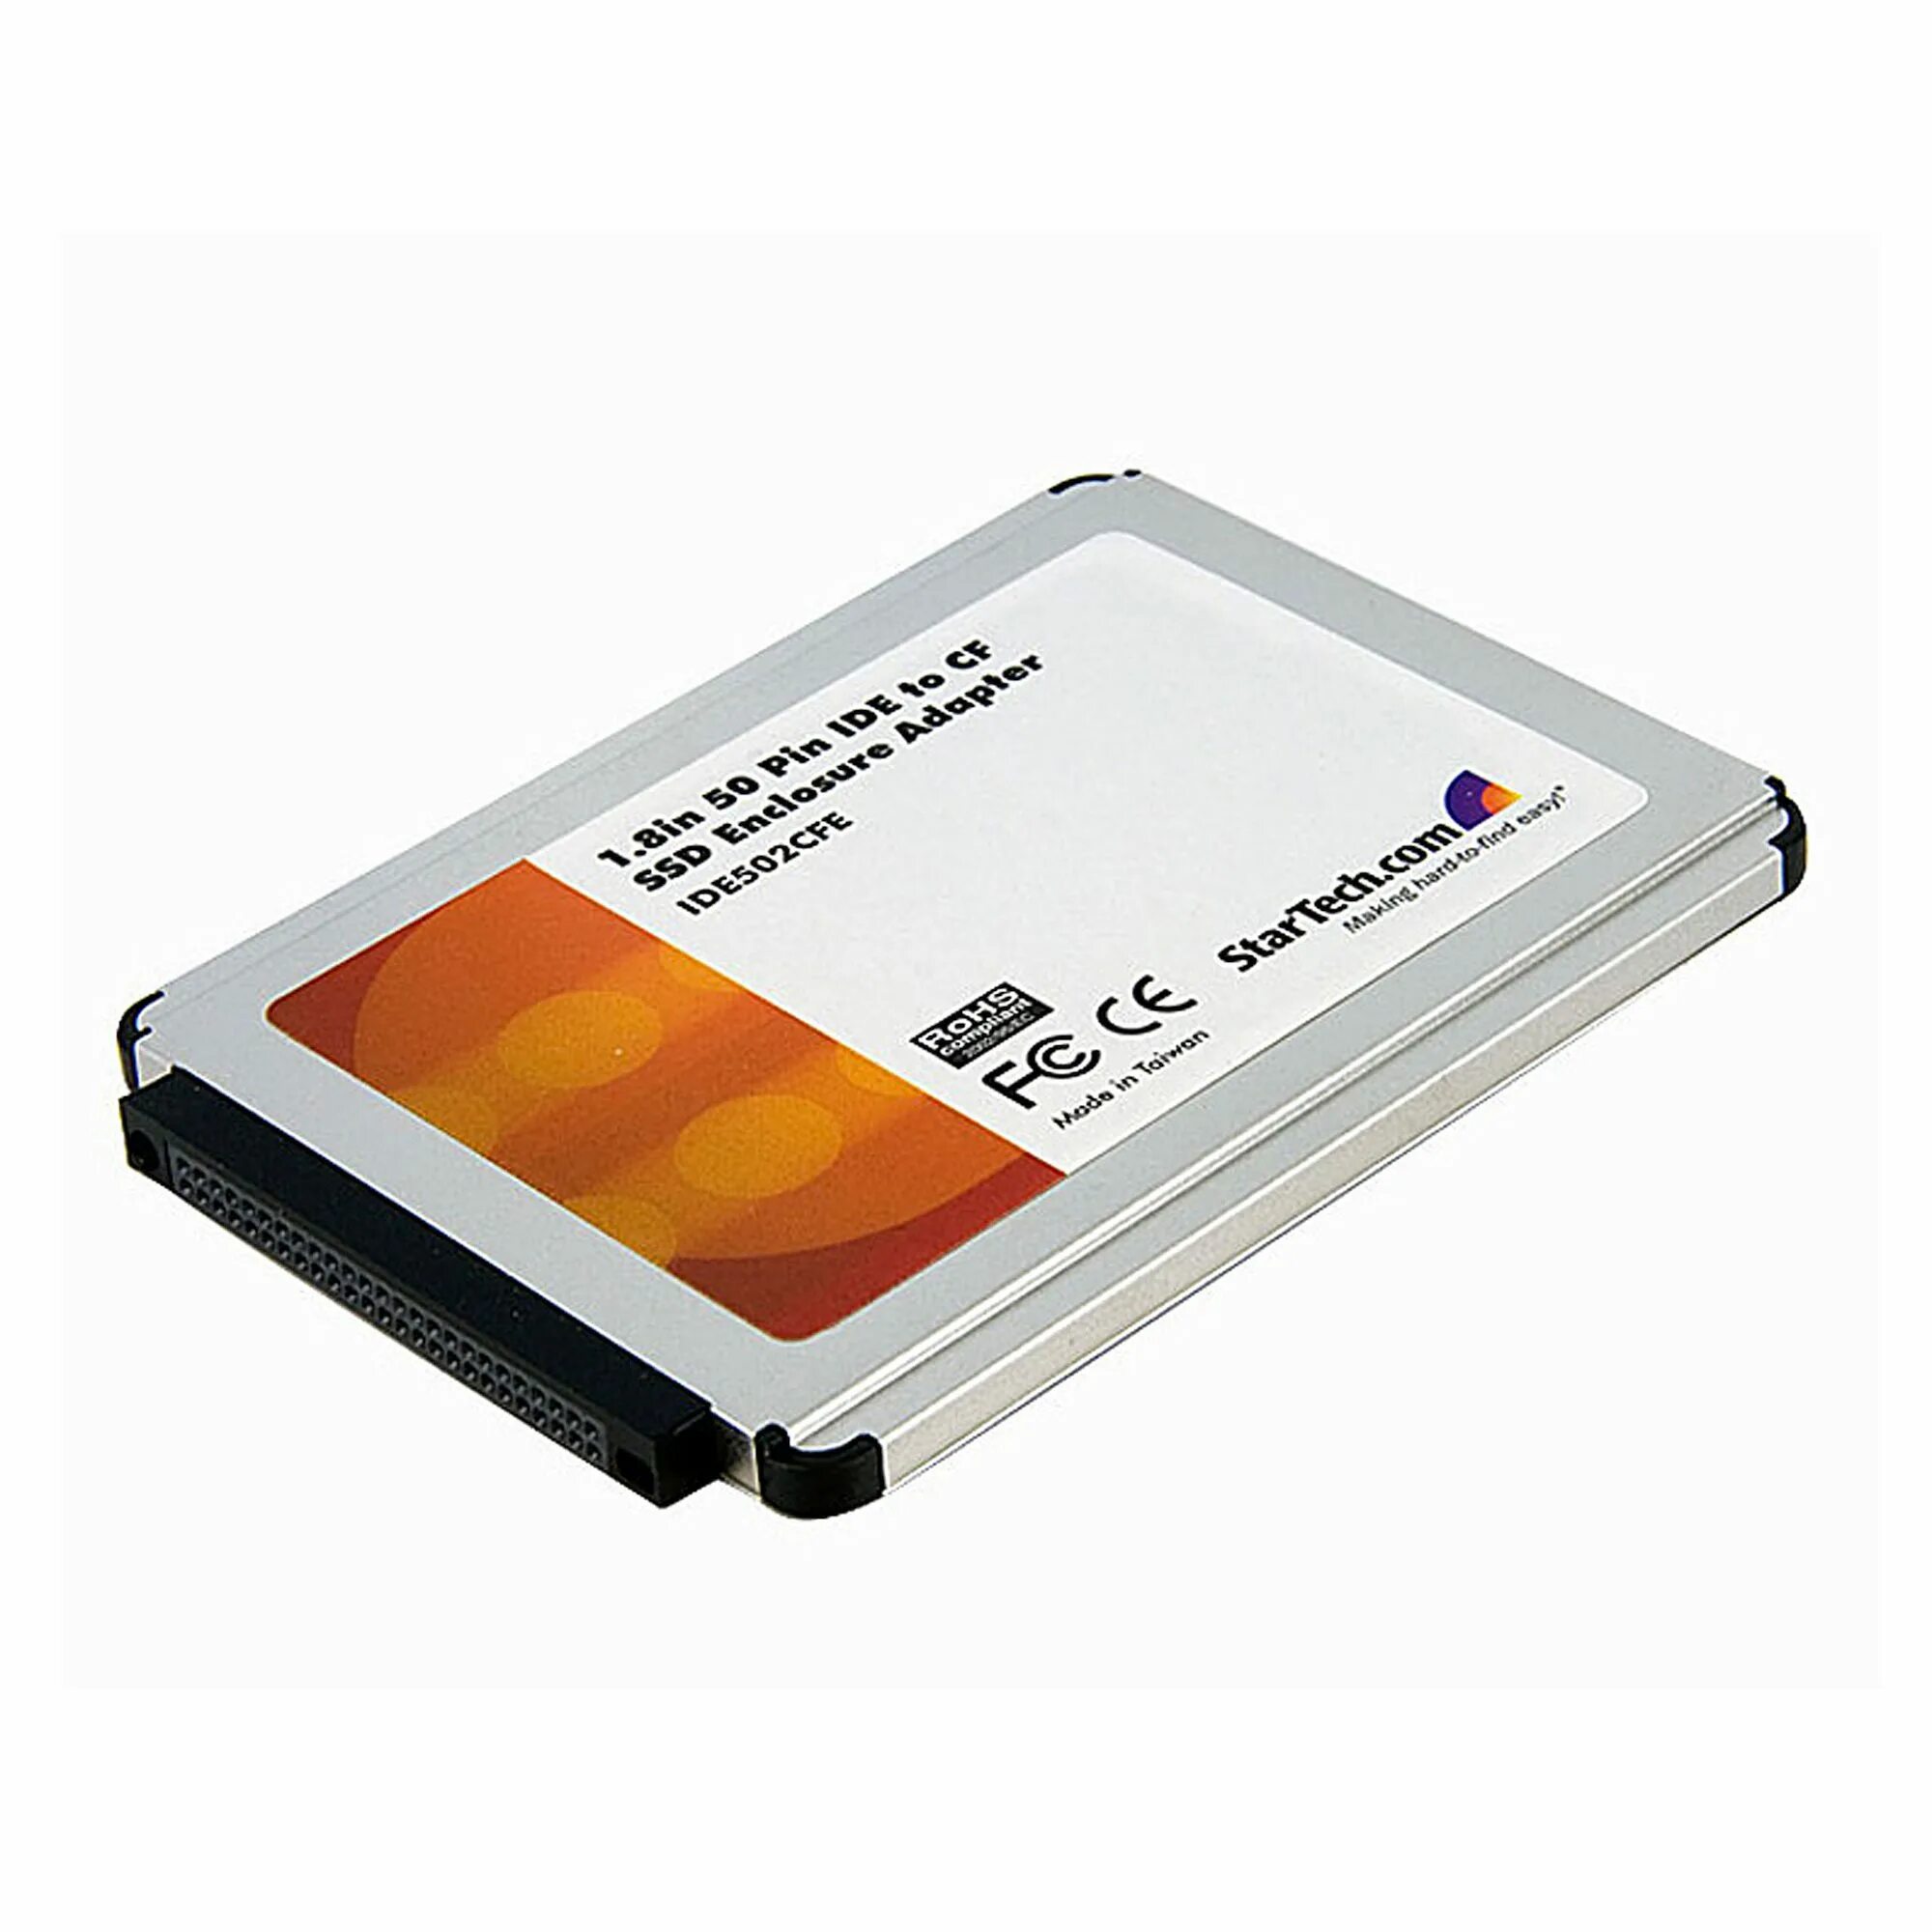 1,8 "Ide 50 Pin. 1.8" Ide 50pin SSD. Pata 1,8 HDD. Жесткий диск ide 1.8.